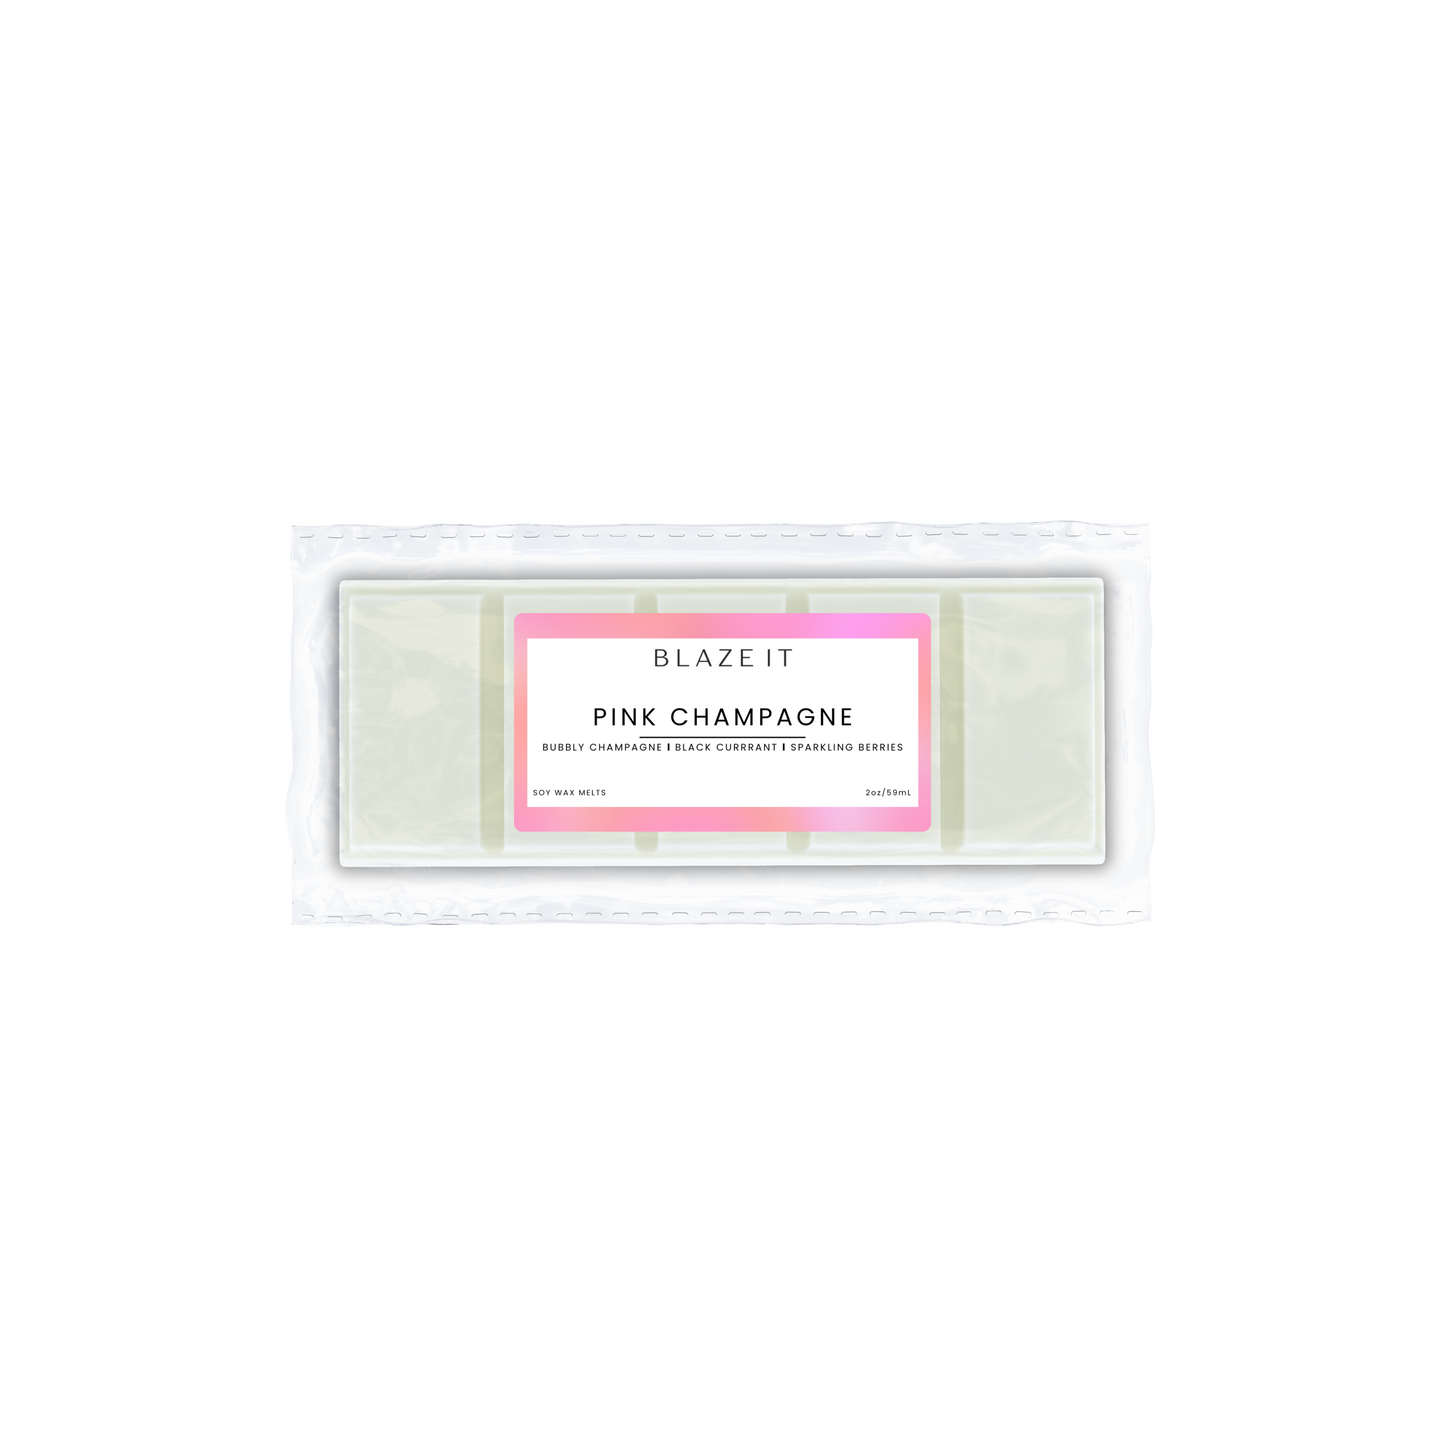 Pink Champagne soy wax melts - Blaze It Candle Co